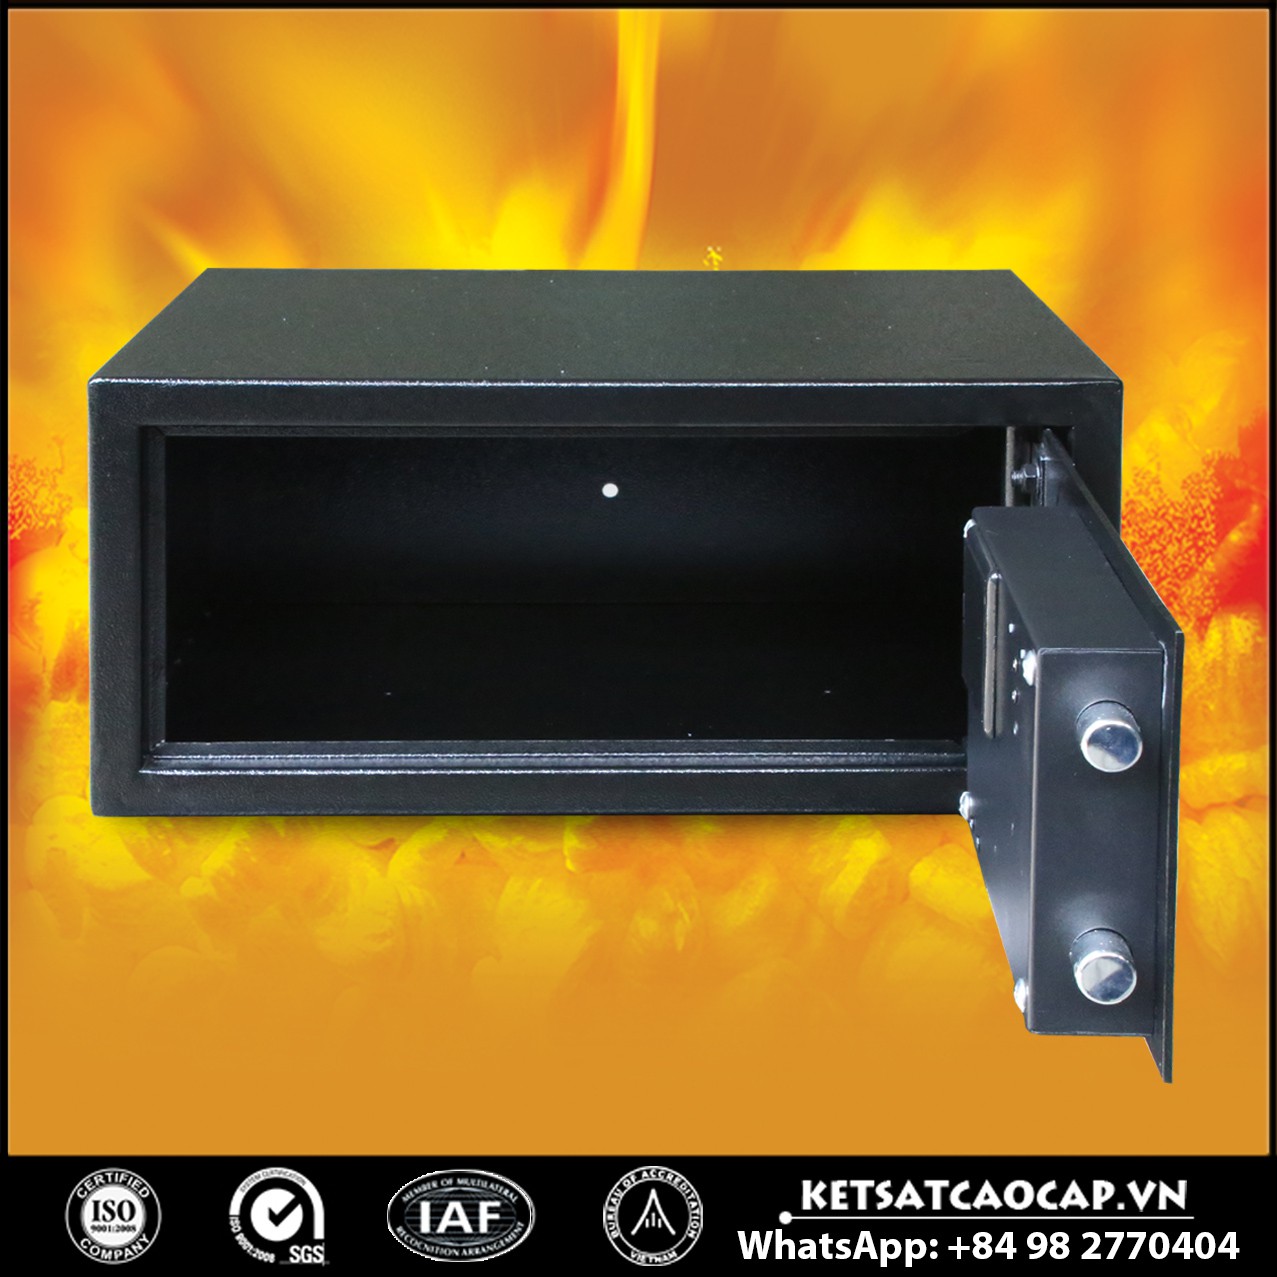 Portable Hotel Safes Factory Direct & Fast Shipping‎